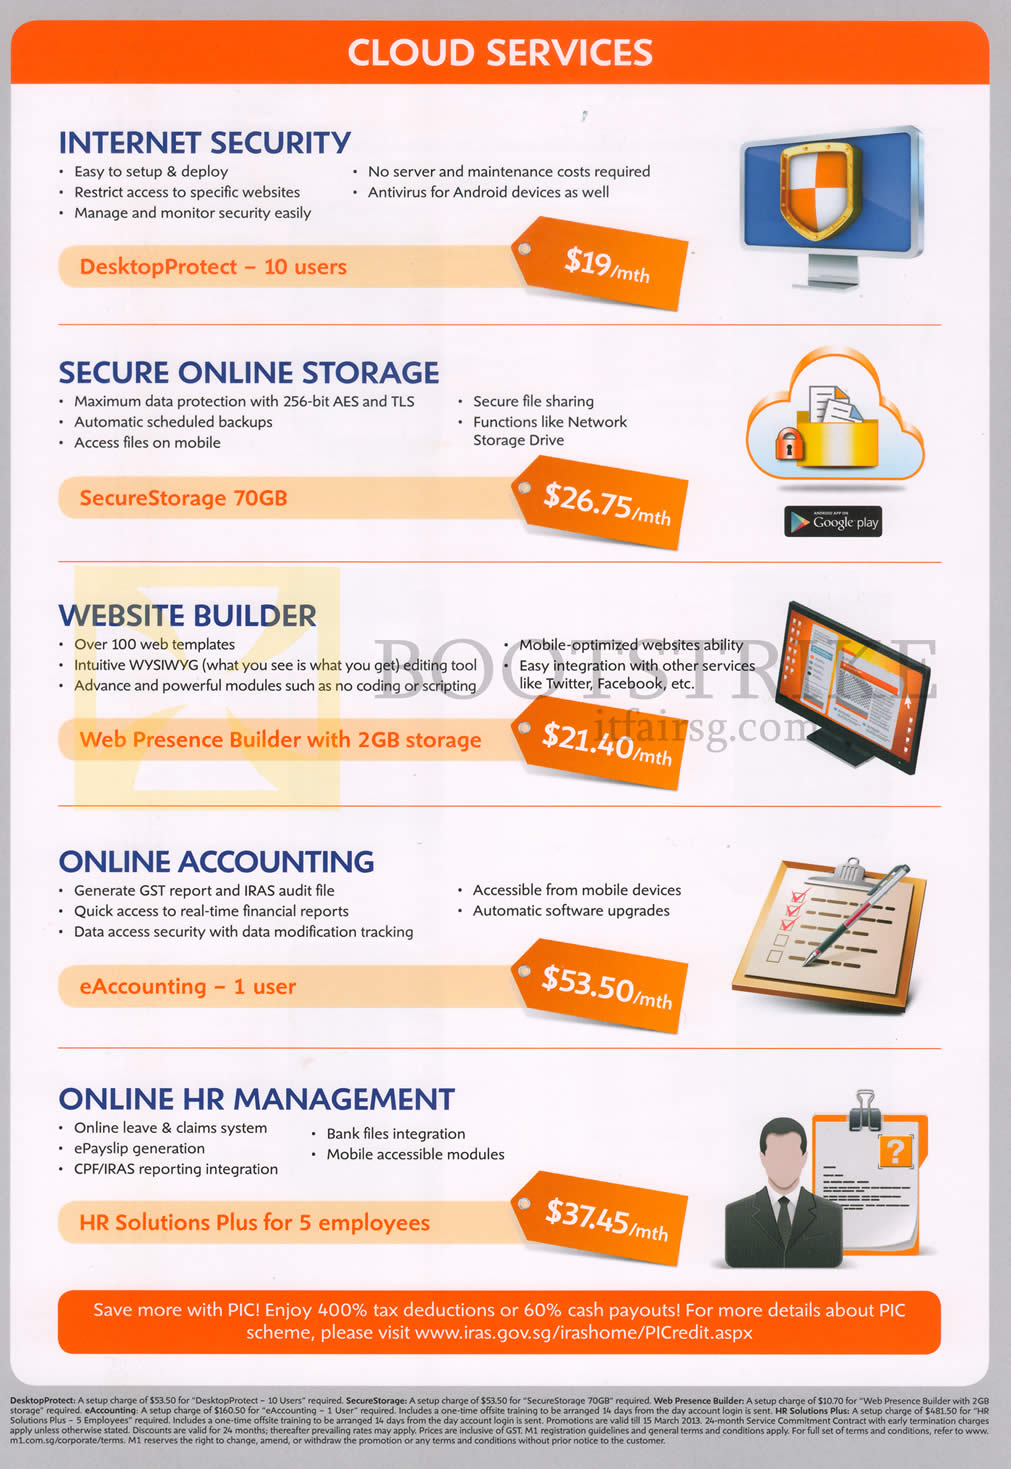 IT SHOW 2013 price list image brochure of M1 Business Cloud Services Internet Security, Secure Online Storage, Website Builder, Online Accounting, HR Management